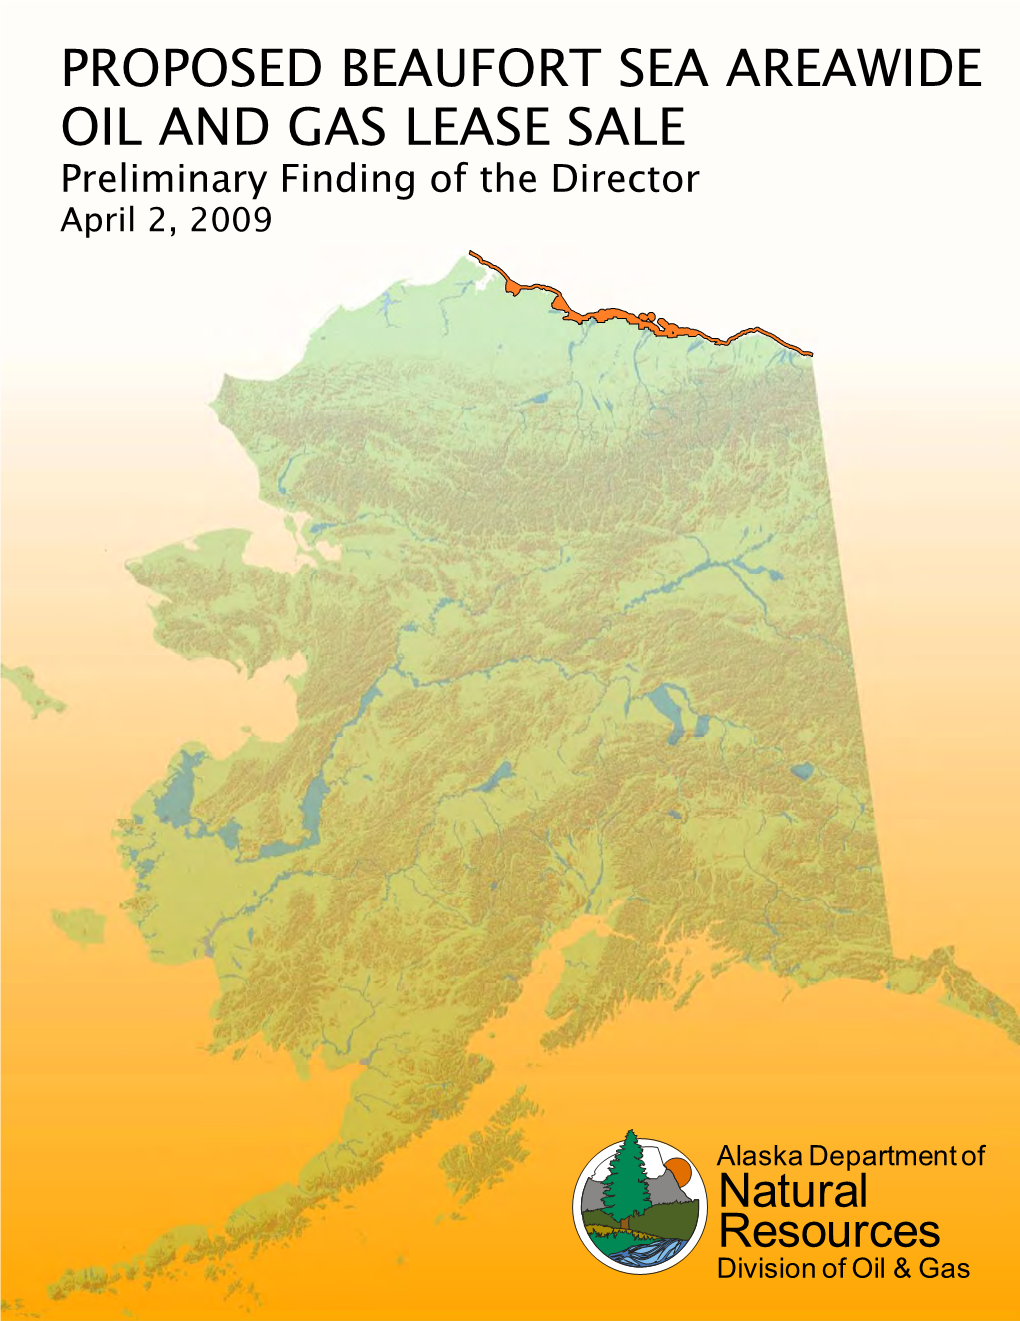 PROPOSED BEAUFORT SEA AREAWIDE OIL and GAS LEASE SALE Preliminary Finding of the Director April 2, 2009